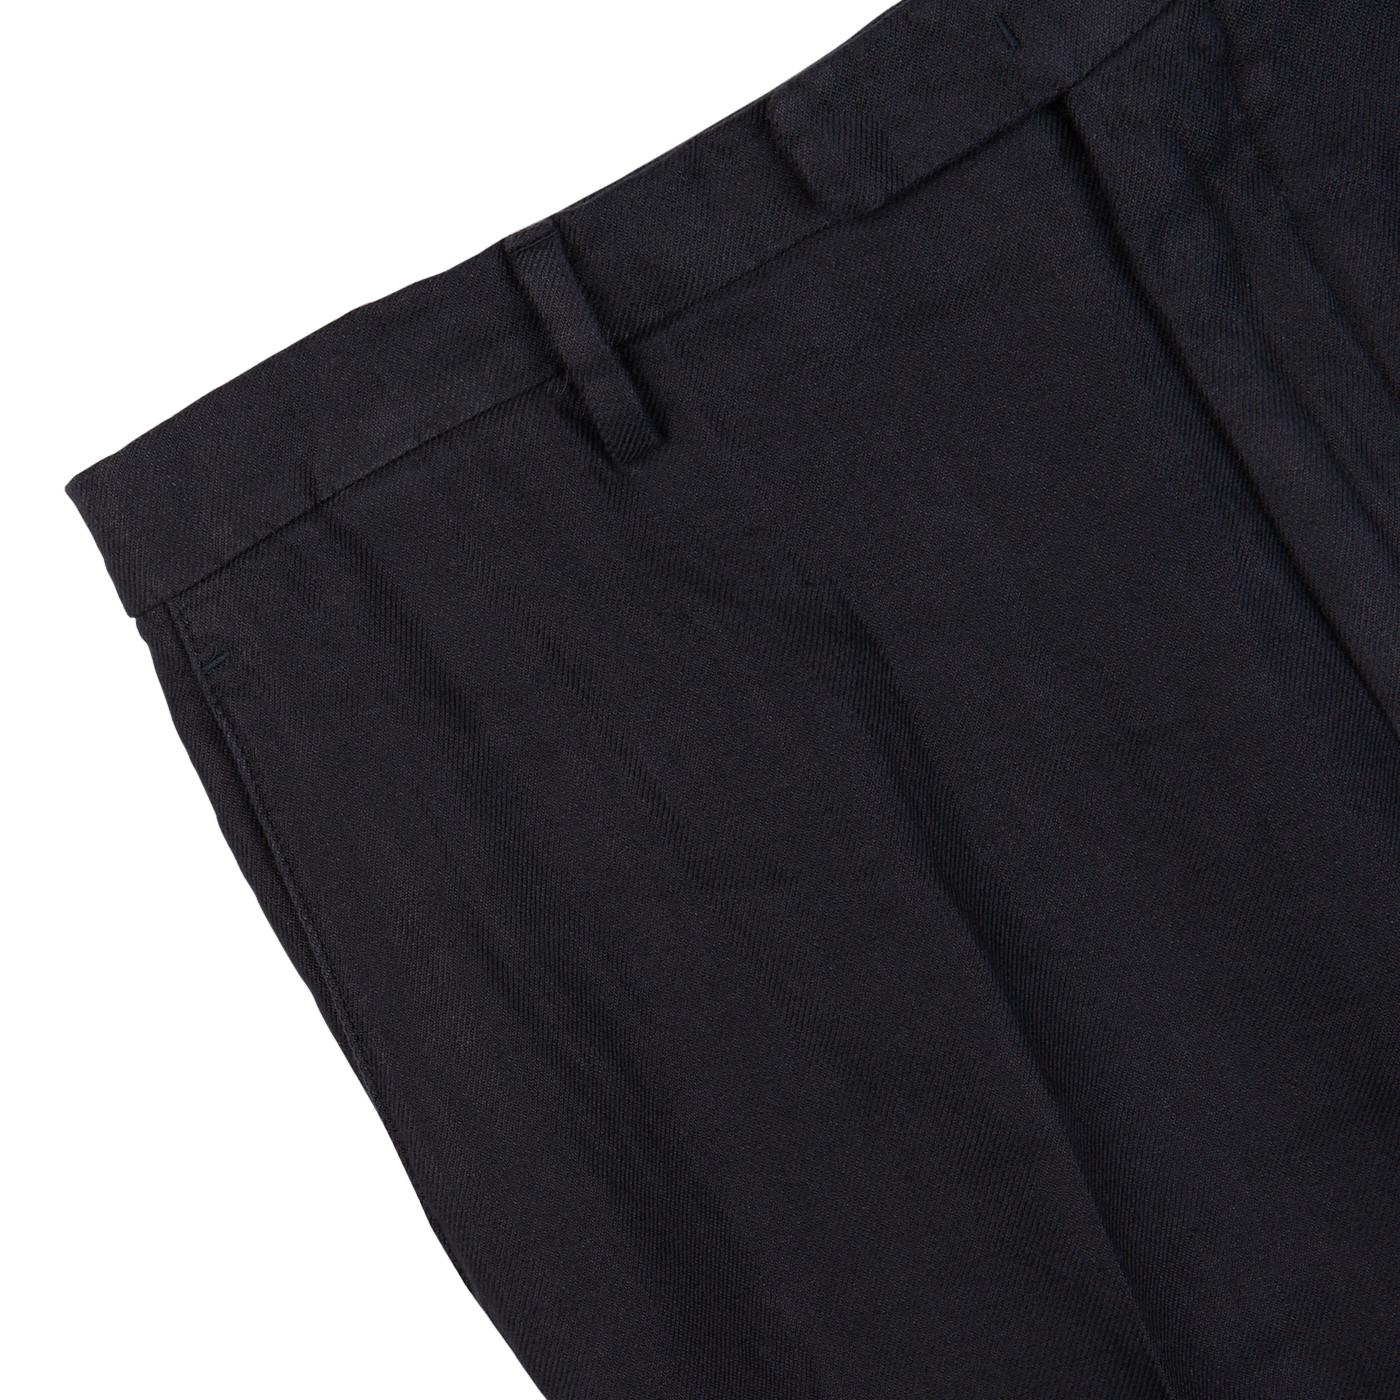 Navy blue washed Irish linen trousers with pleats on a white background, made from pure linen by Boglioli.